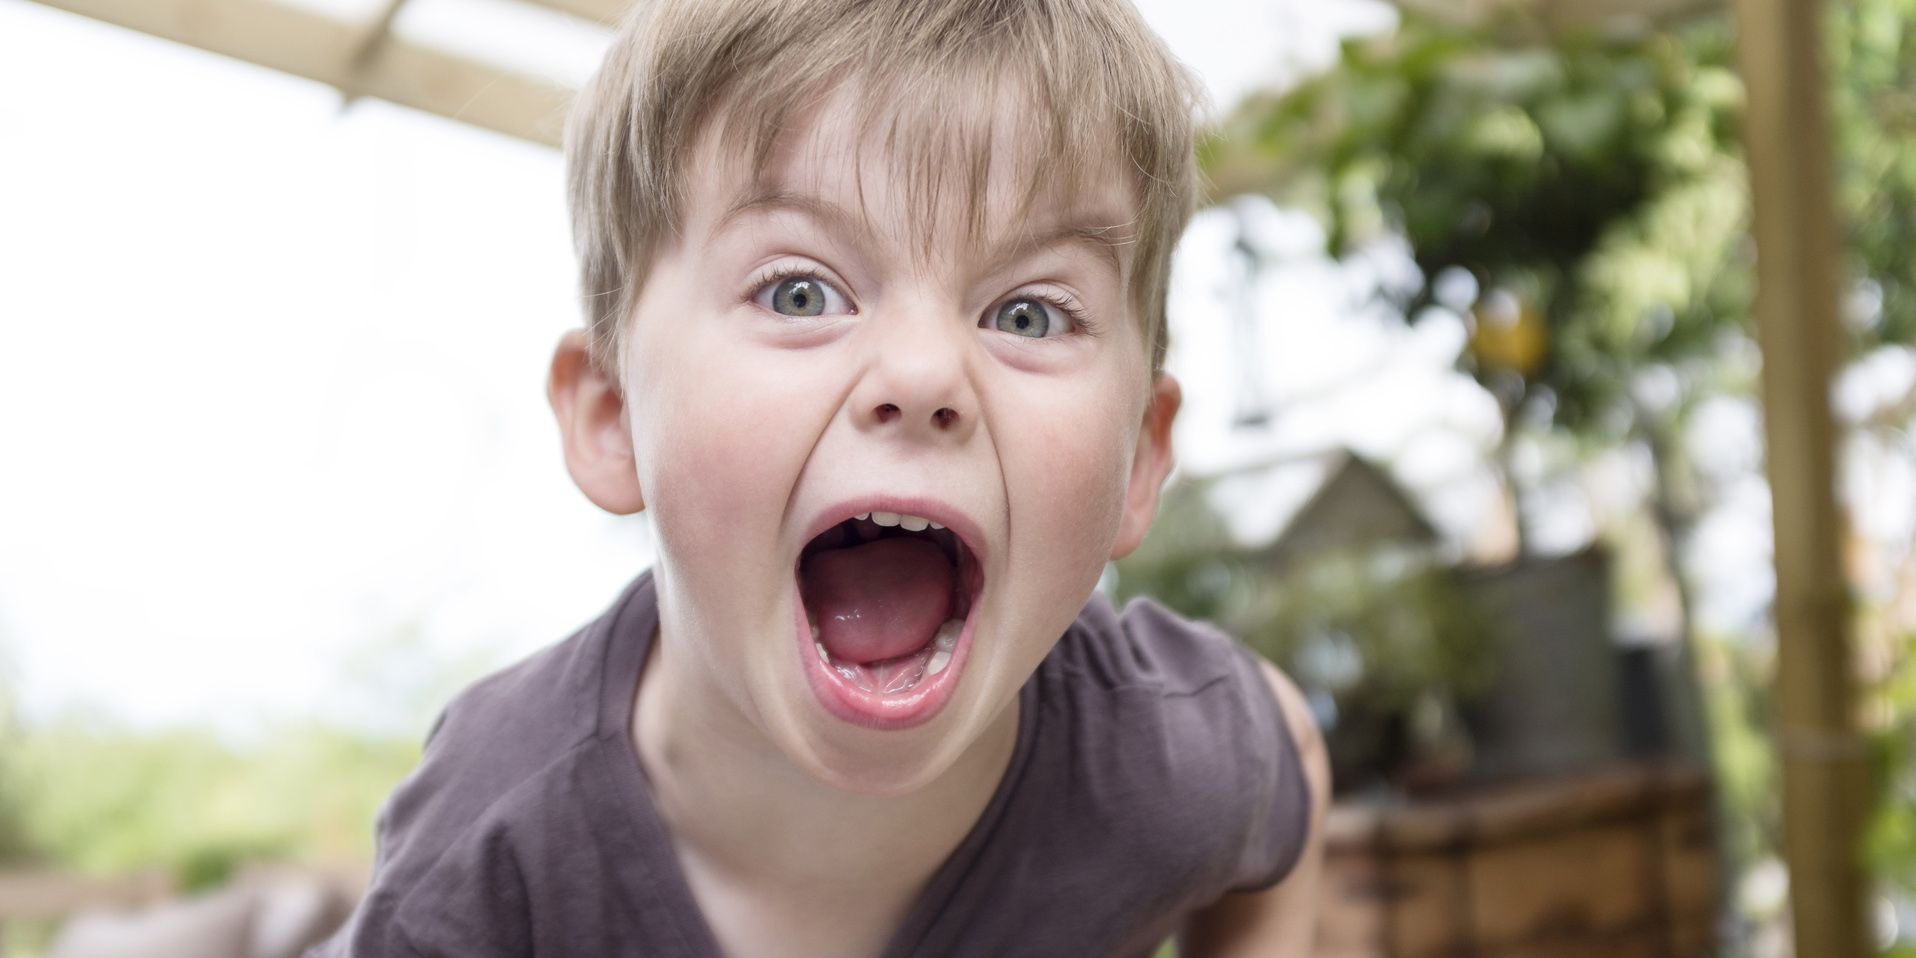 How to Control Rowdy Kids - Controlling Behavior in Children